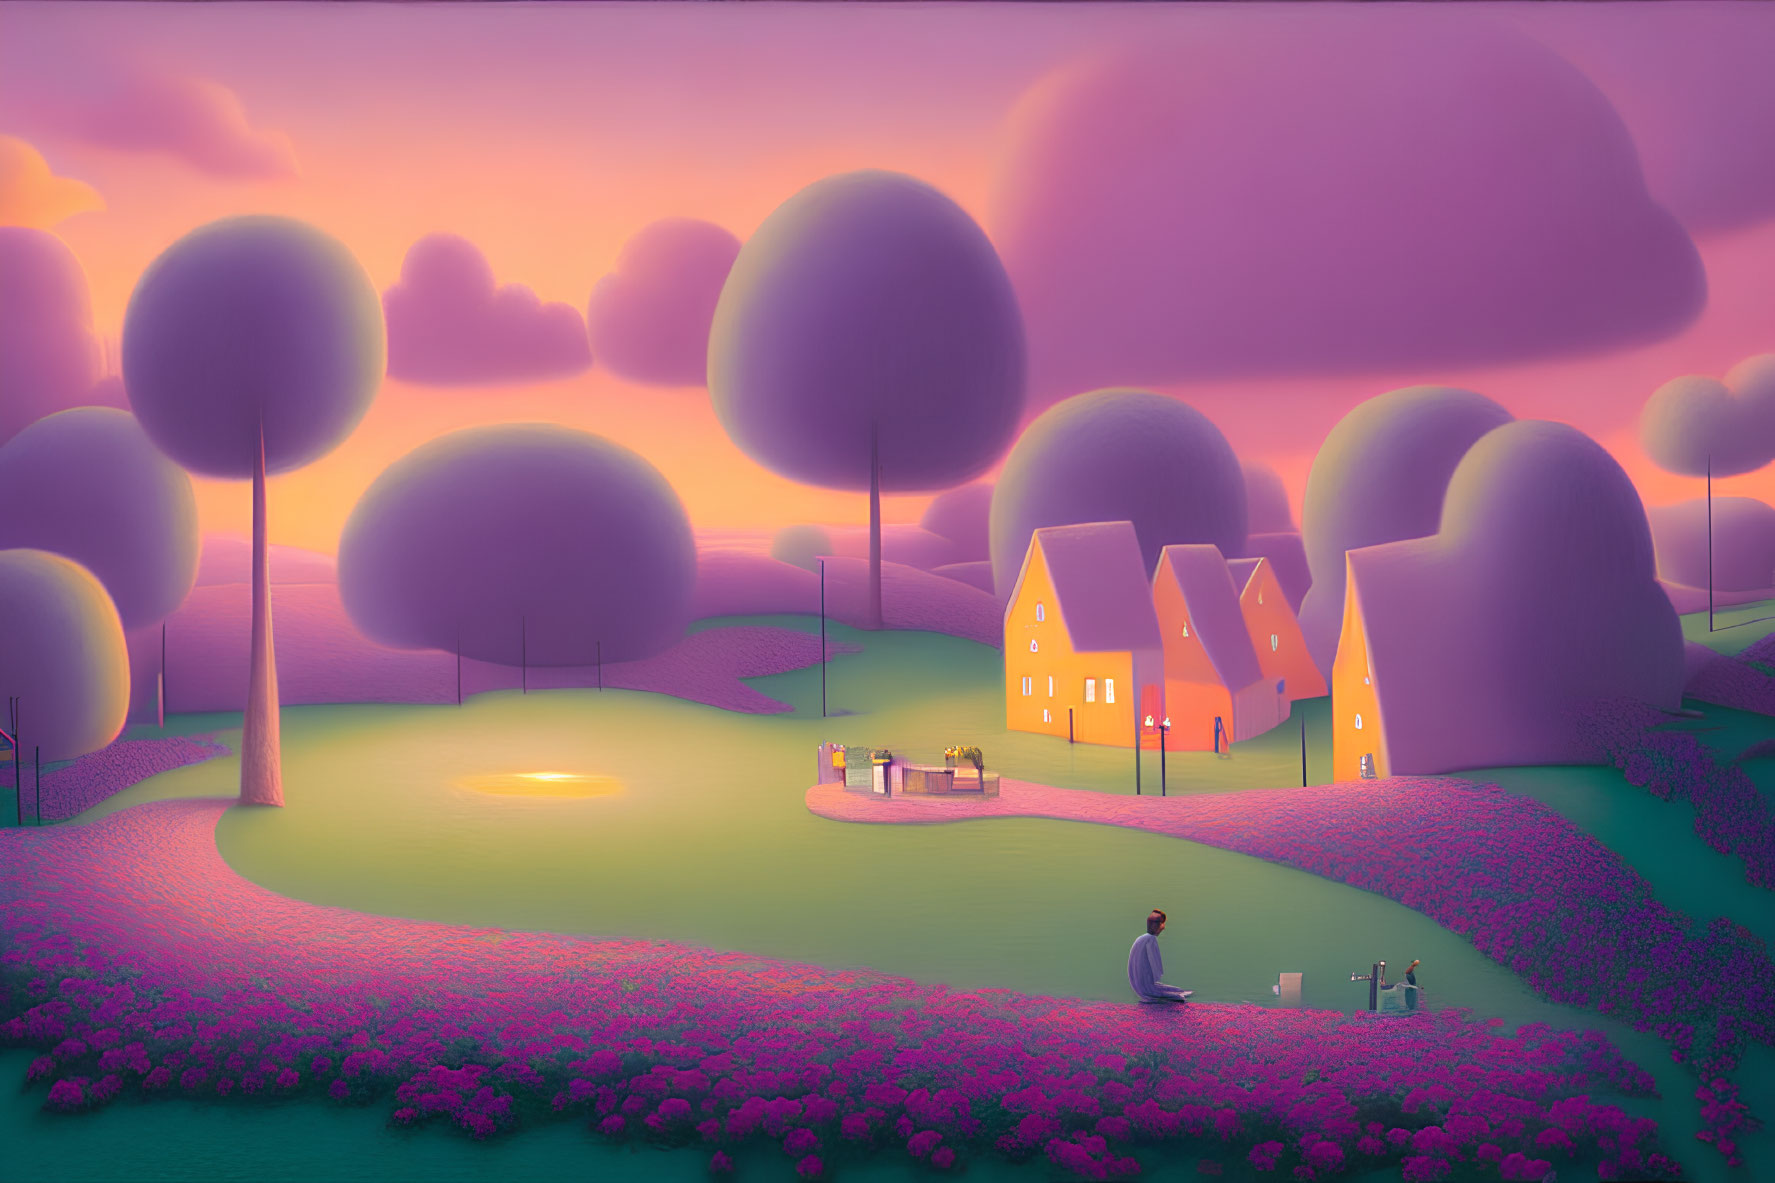 Stylized purple landscape with rolling hills, trees, pond, house, and figure on bench